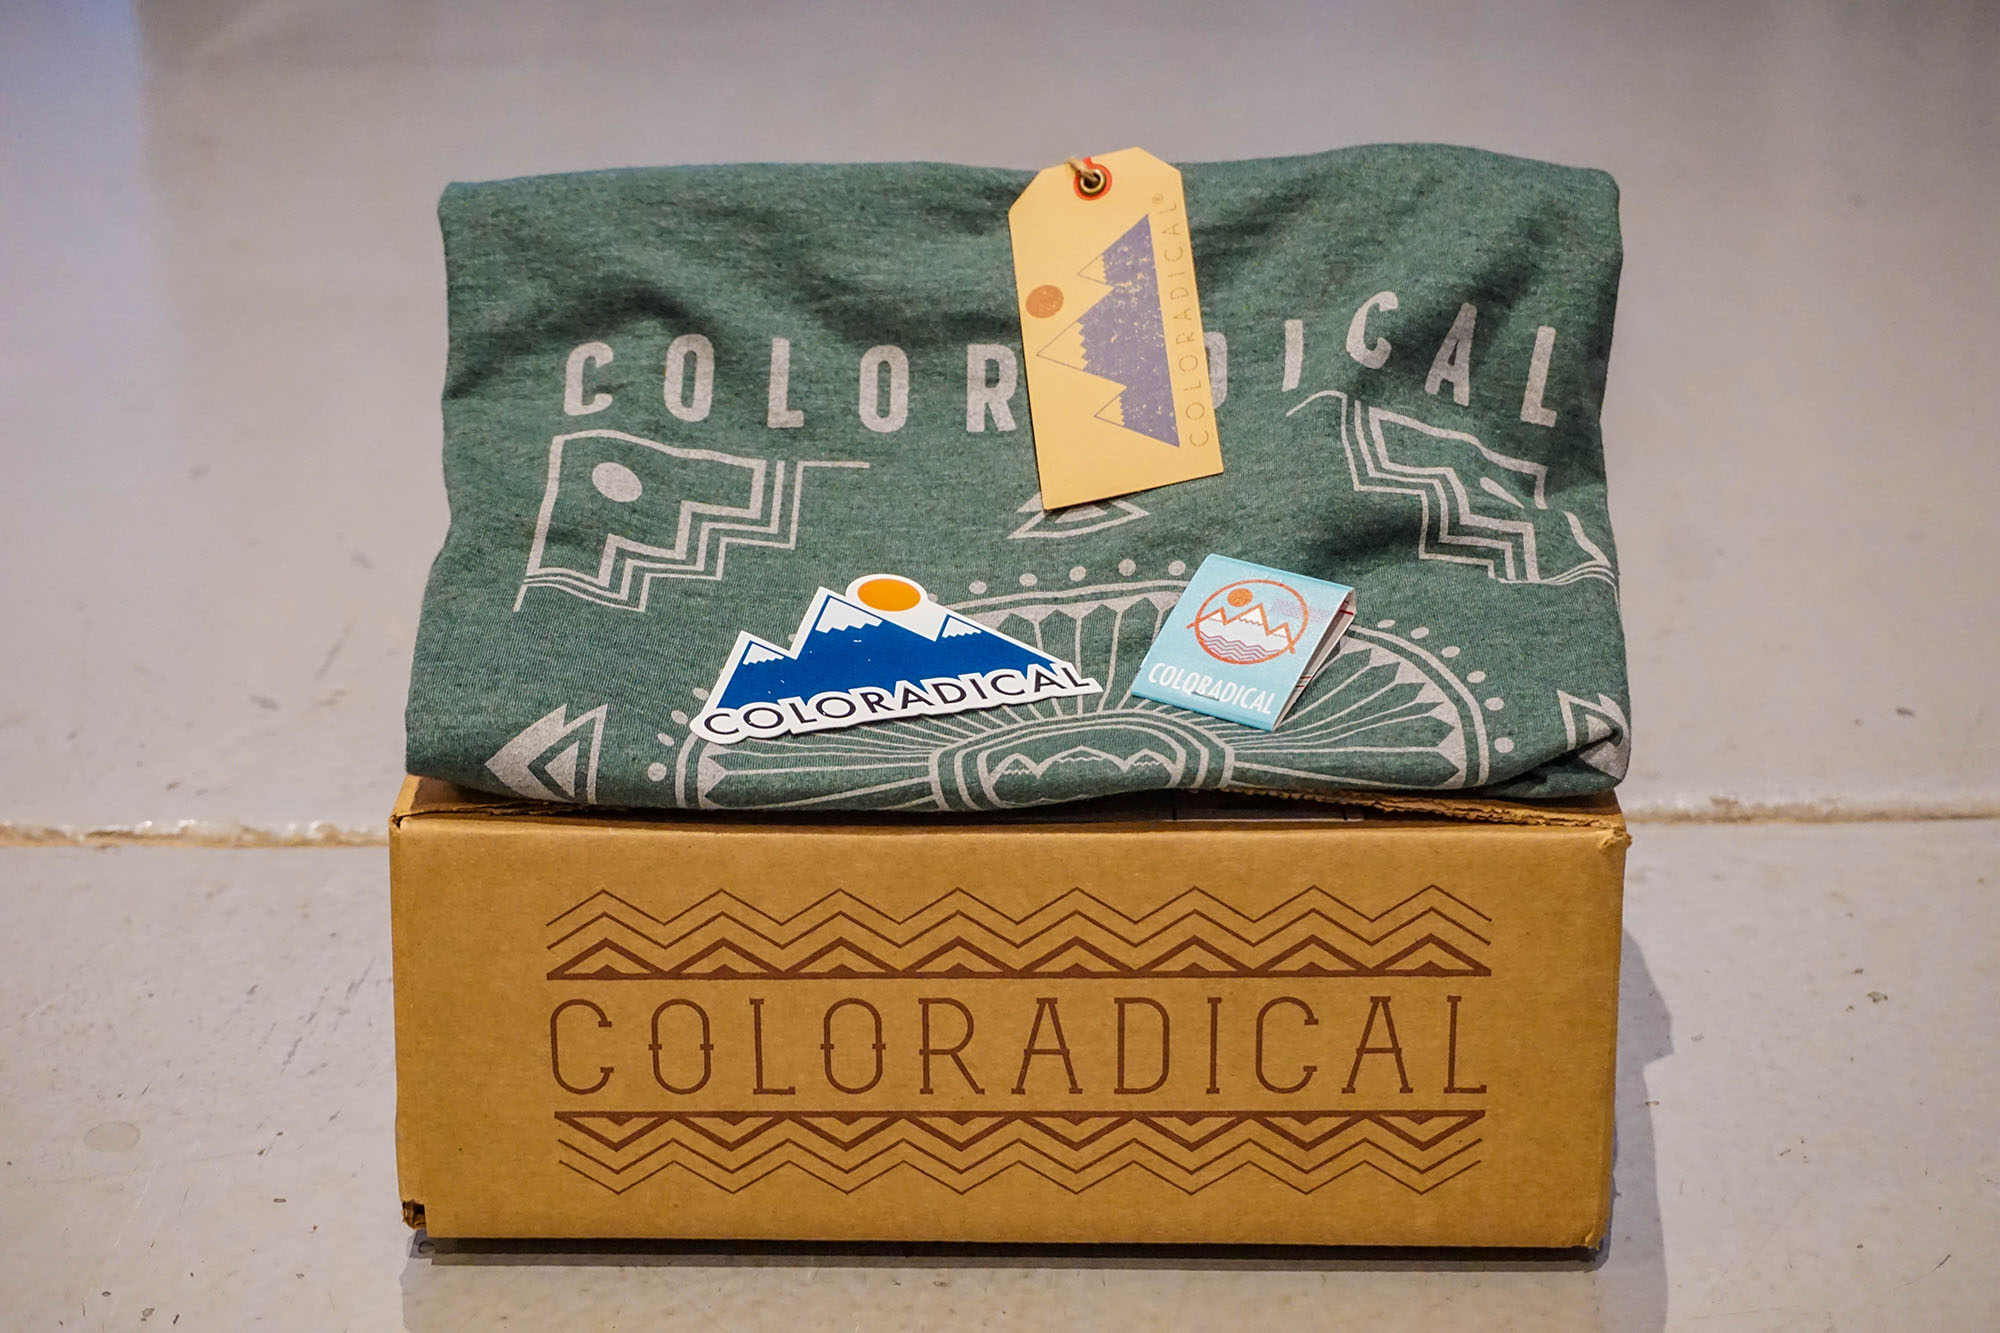 5 Colorado Clothing & Accessories Brands to Love